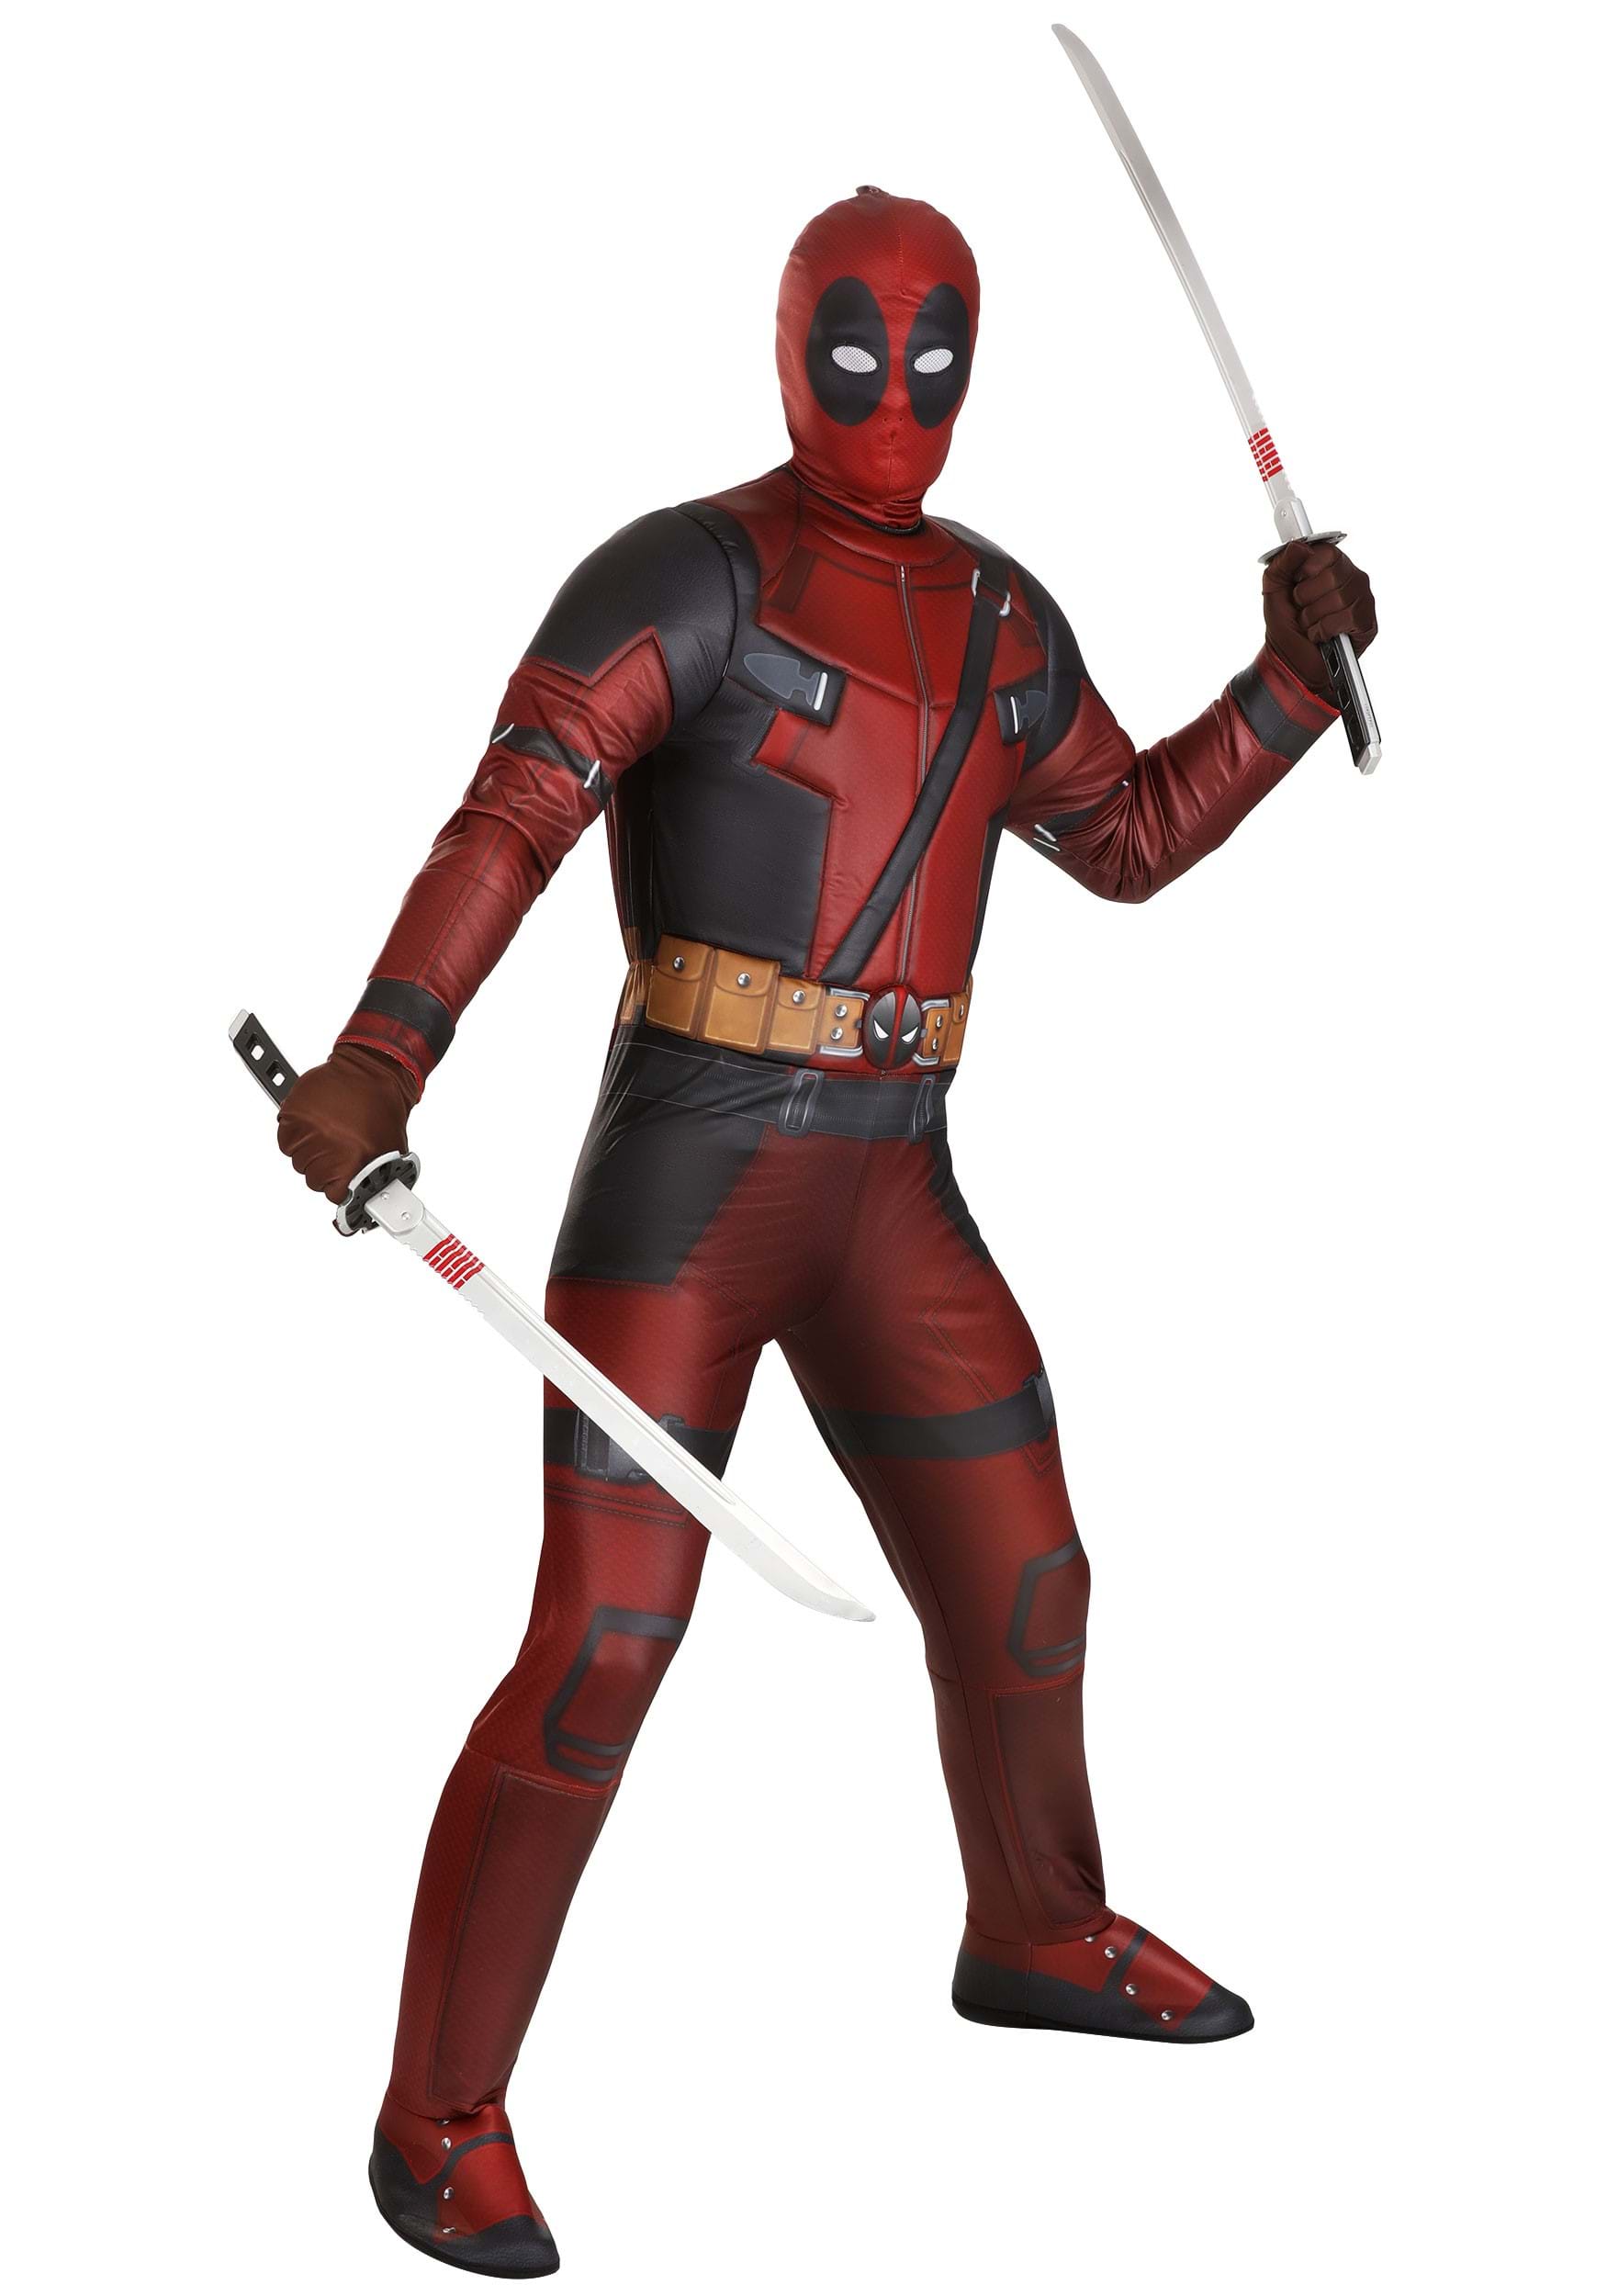 Deadpool Costume for Adults